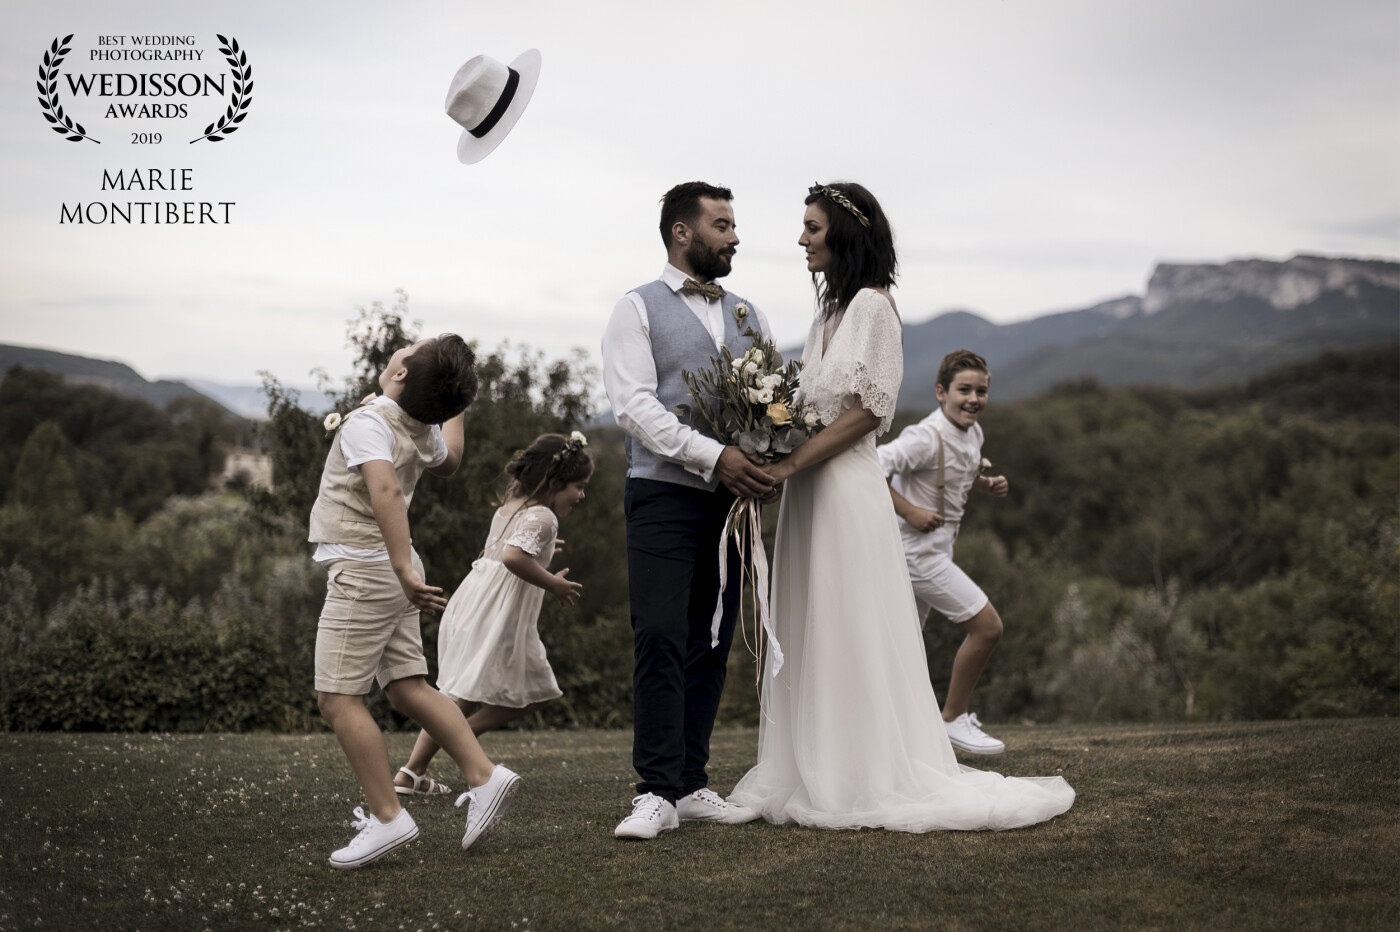 Meet Severine & Gregory ' family during their wedding. A sharefull and beloved moment after the ceremony for those kids! What a lovely family portrait, isn't it?